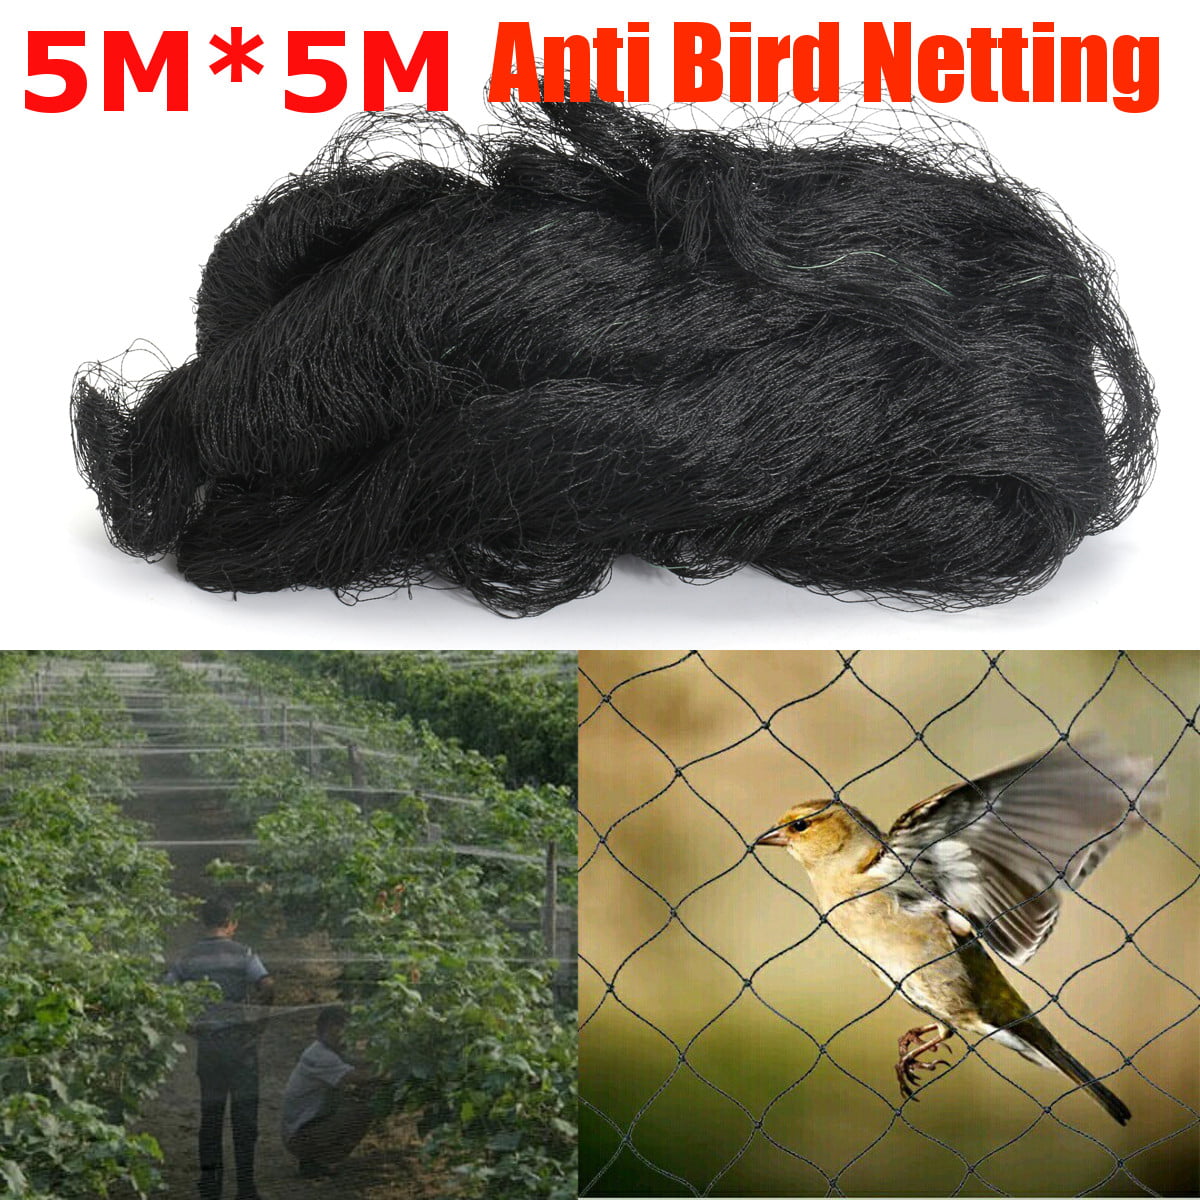 8.2×19.69 ft Garden Netting,Insect Netting Garden Anti-Bird Net Protect Plants,Flowers,Crops and Fruits Bird Netting,Anti Butterfly Netting